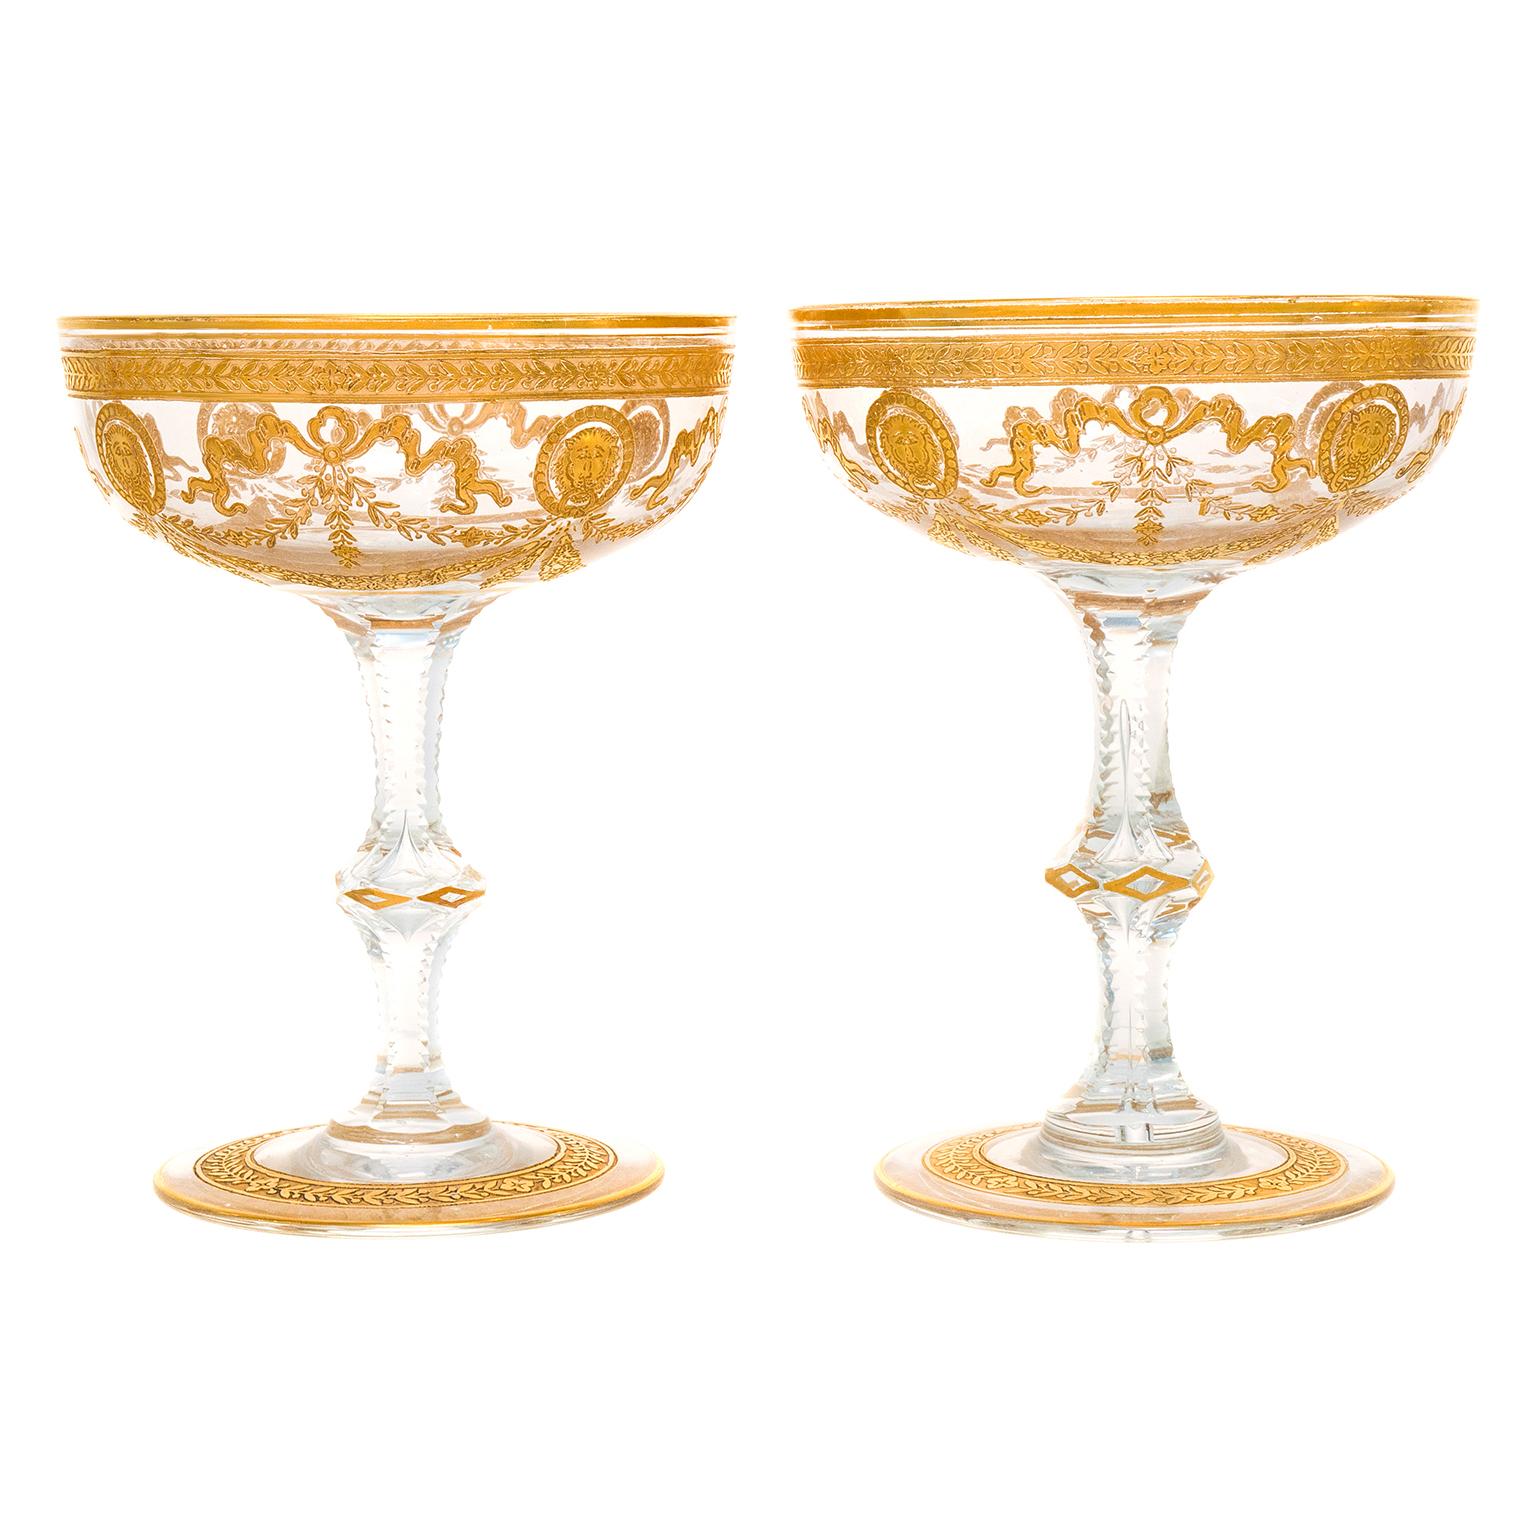 St. Louis Congress Coupe Champagnes In Excellent Condition For Sale In Litchfield, CT